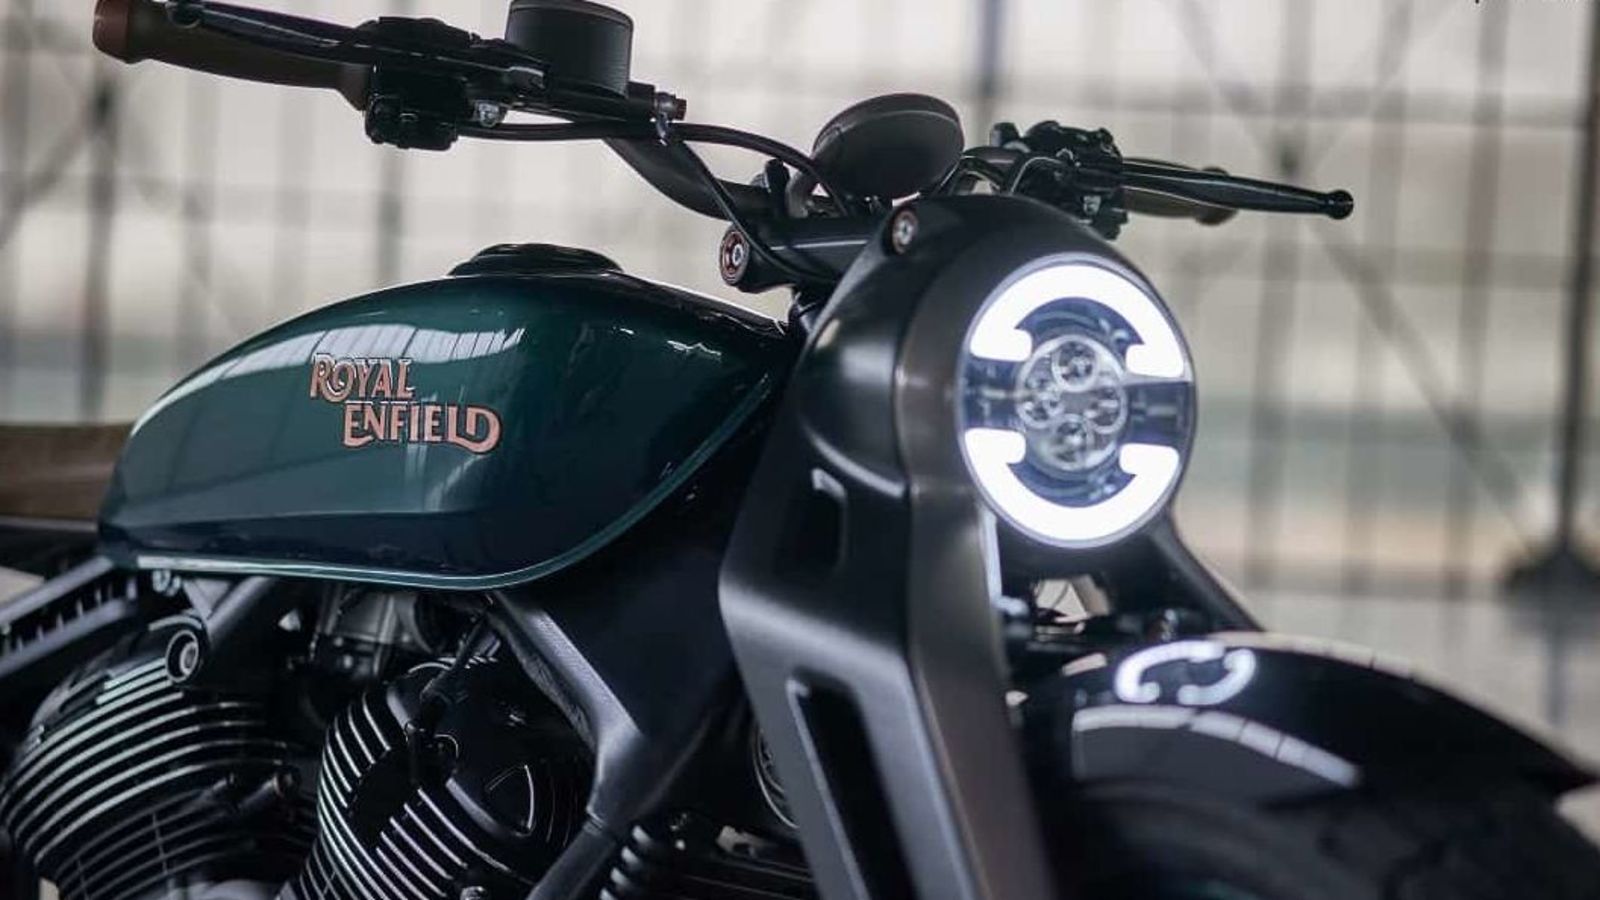 Upcoming Royal Enfield bikes set for Indian market in 2022 | HT Auto